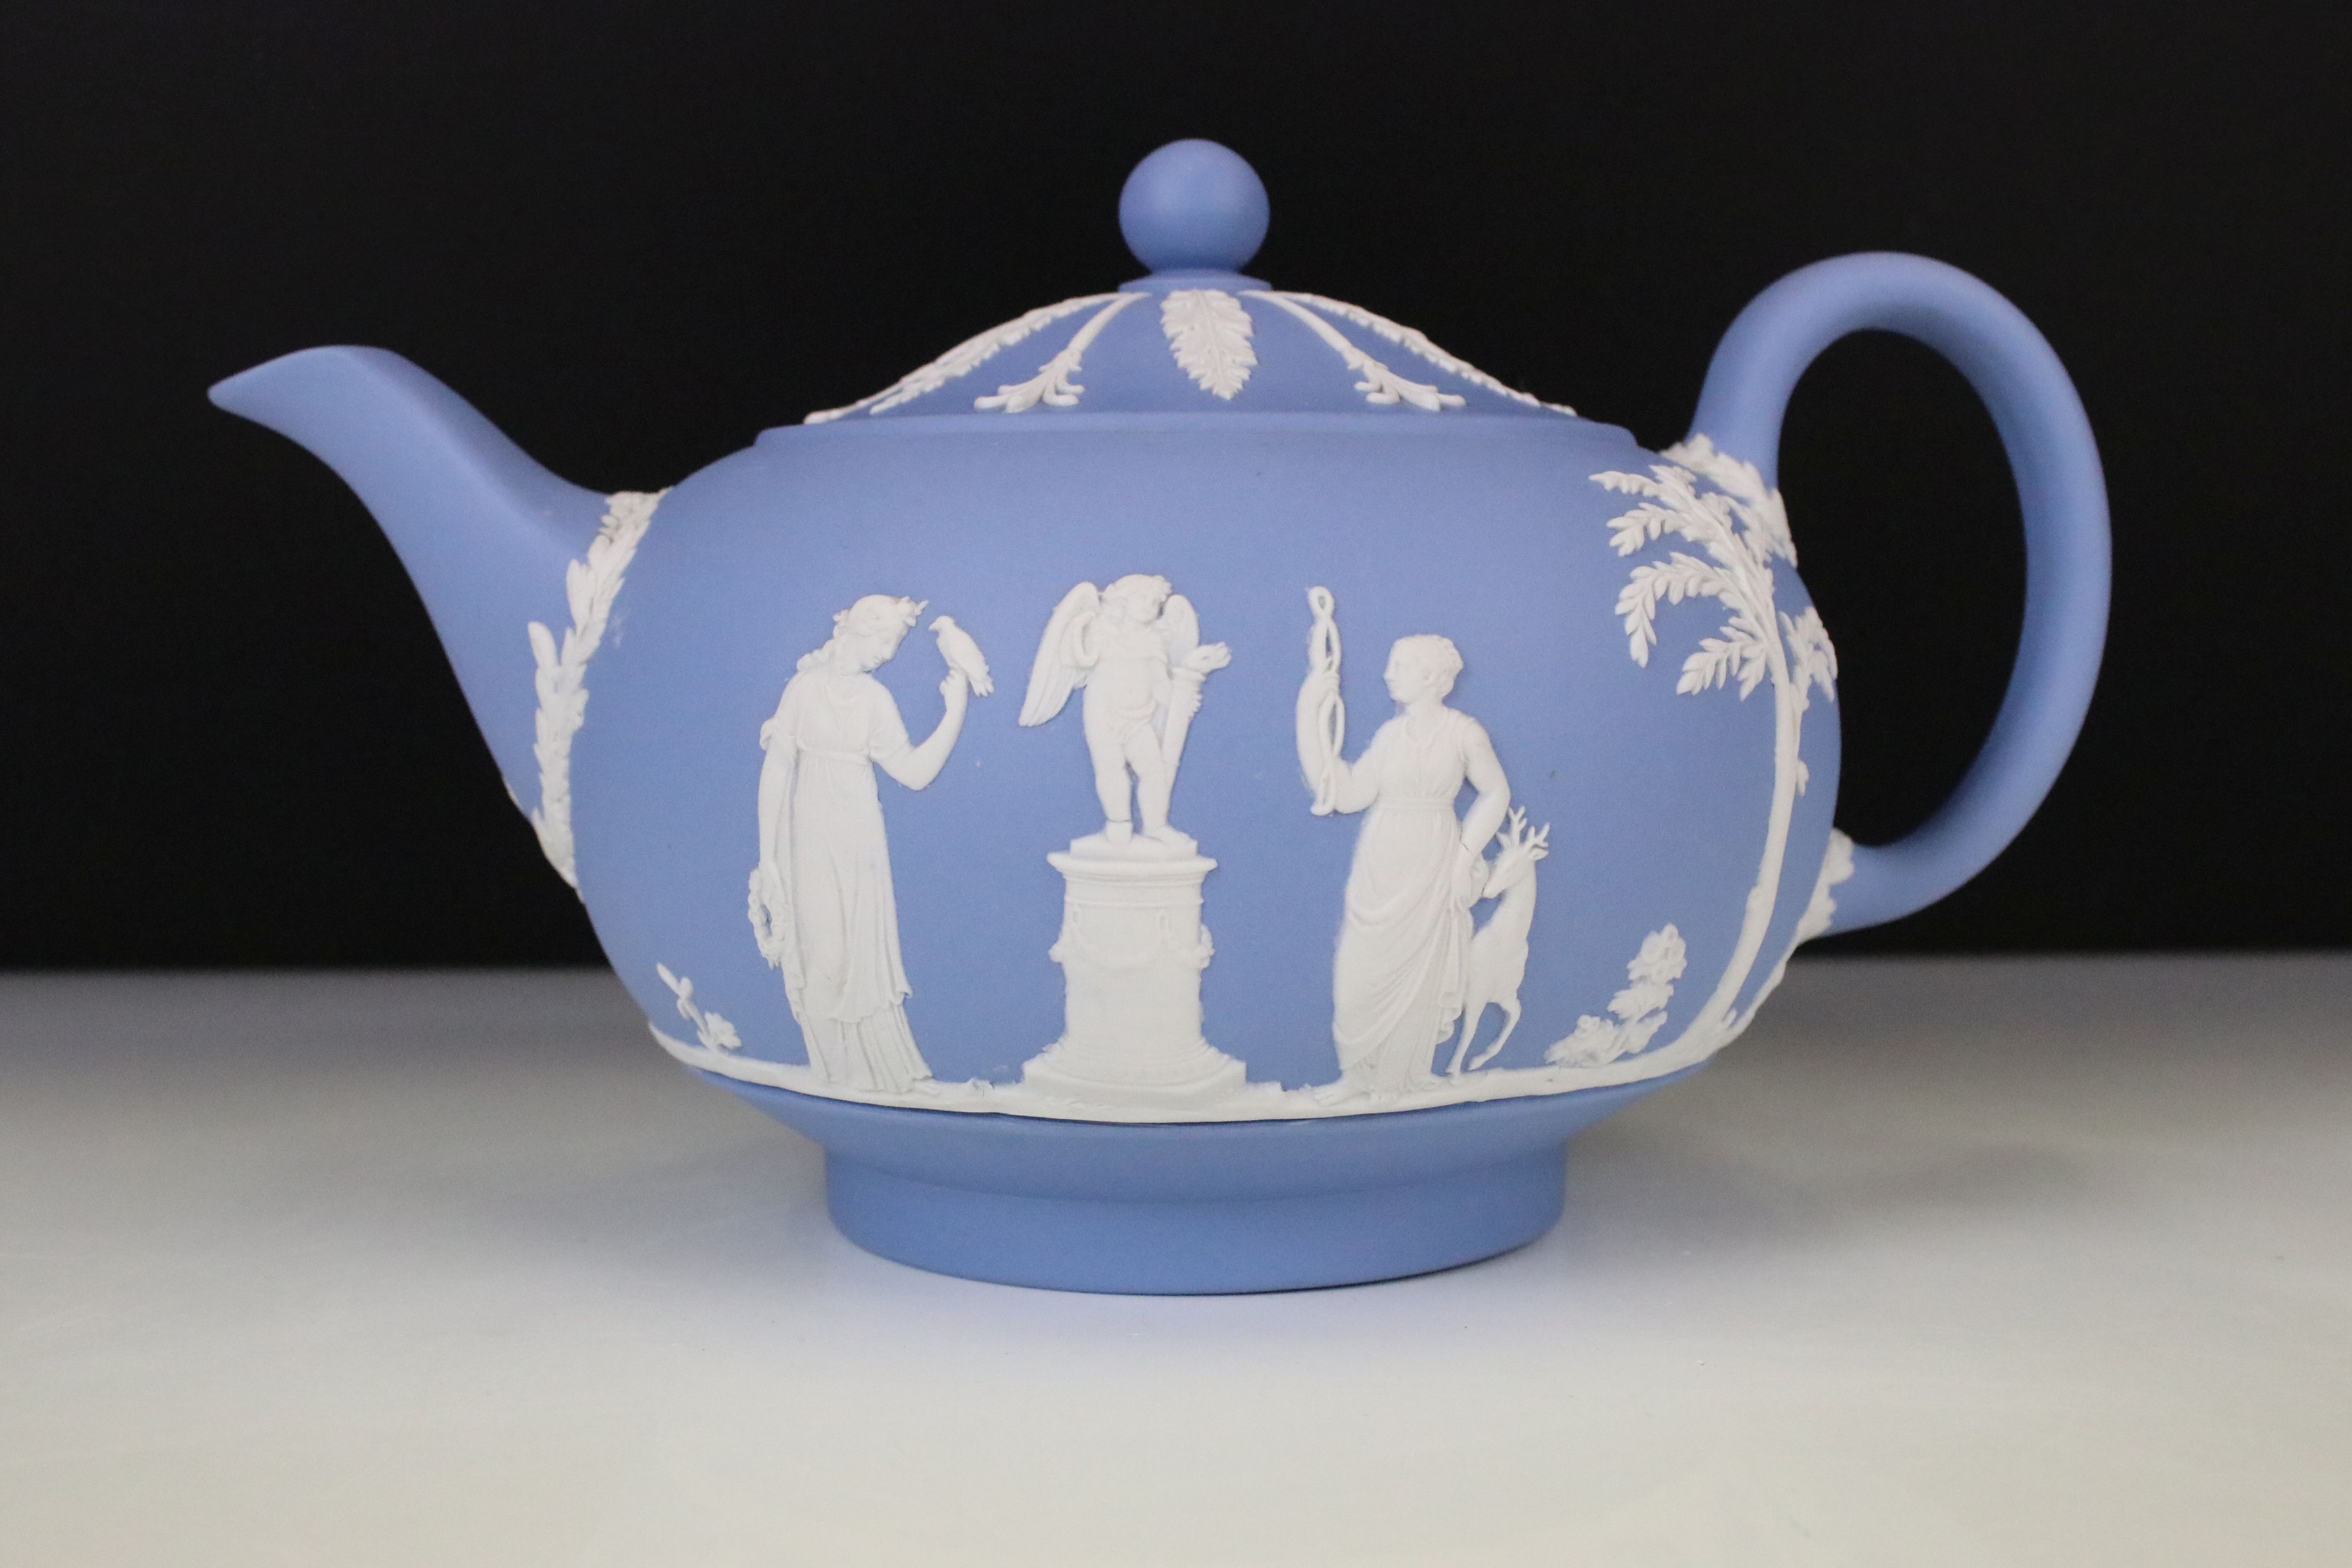 Wedgwood Jasperware Pale Blue Tea Service for 6 to include 2 x teapots & covers, 6 teacups & - Image 3 of 12